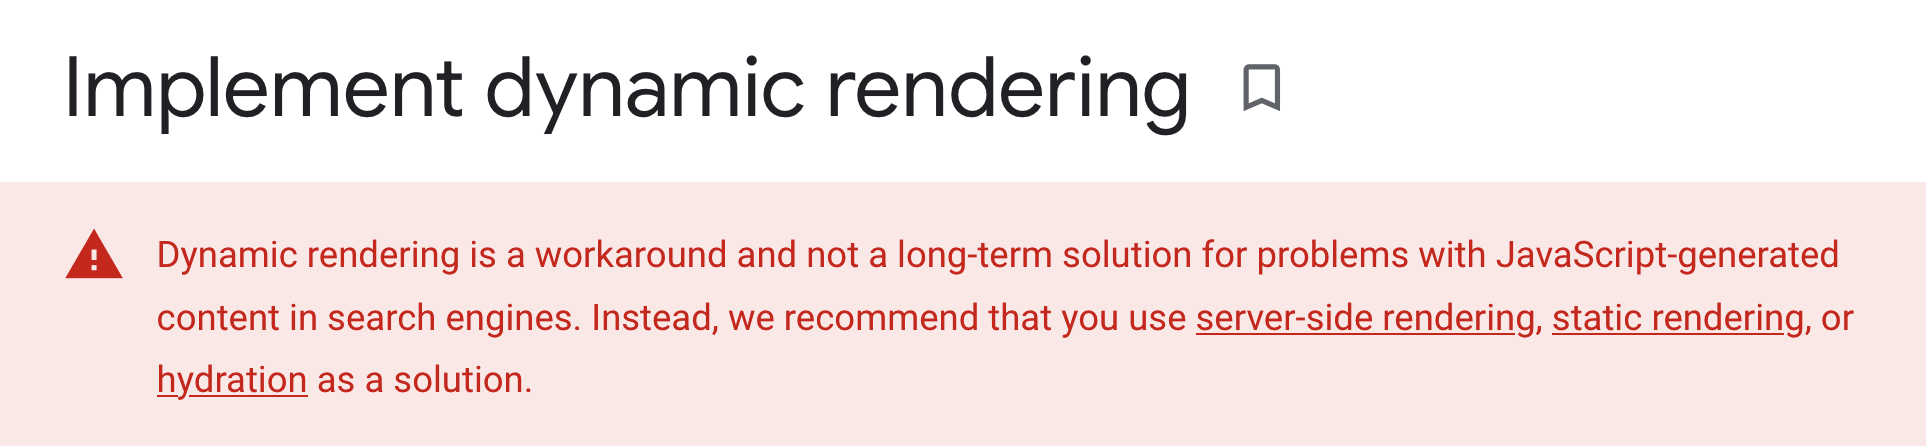 Implement dynamic rendering – Dynamic rendering is a workaround and not a long-term solution for problems with JavaScript-generated content in search engines. Instead, we recommend that you use server-side rendering, static rendering, or hydration as a solution. 